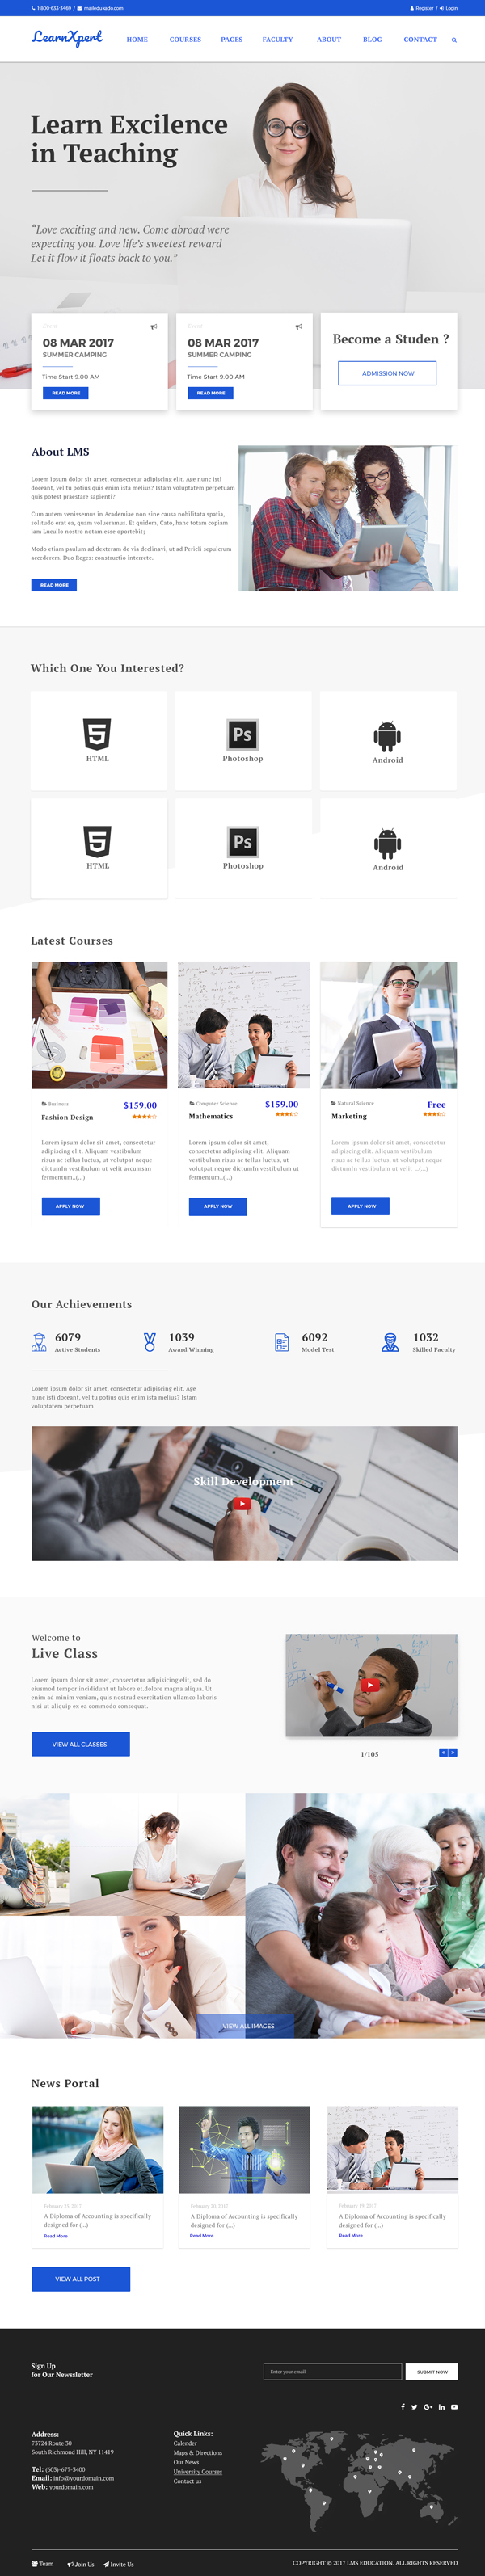 LearnXpert - Free Education and Website Template